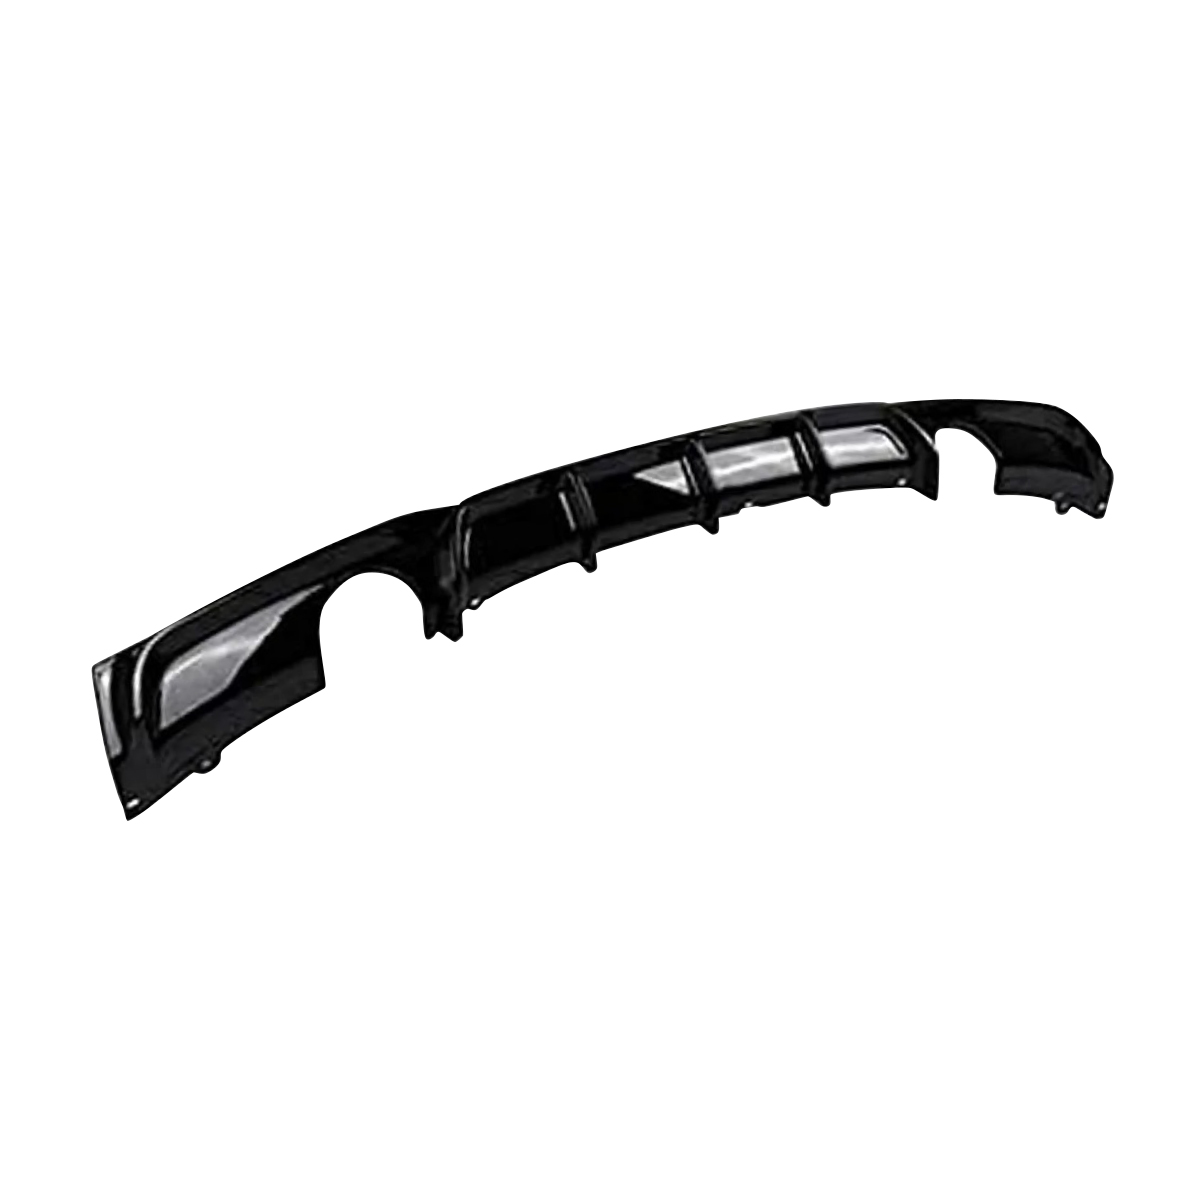 BMW F30 GLOSS BLACK REAR DIFFUSER 1 PIPE DOUBLE OUTLET-BMWF30R2GB